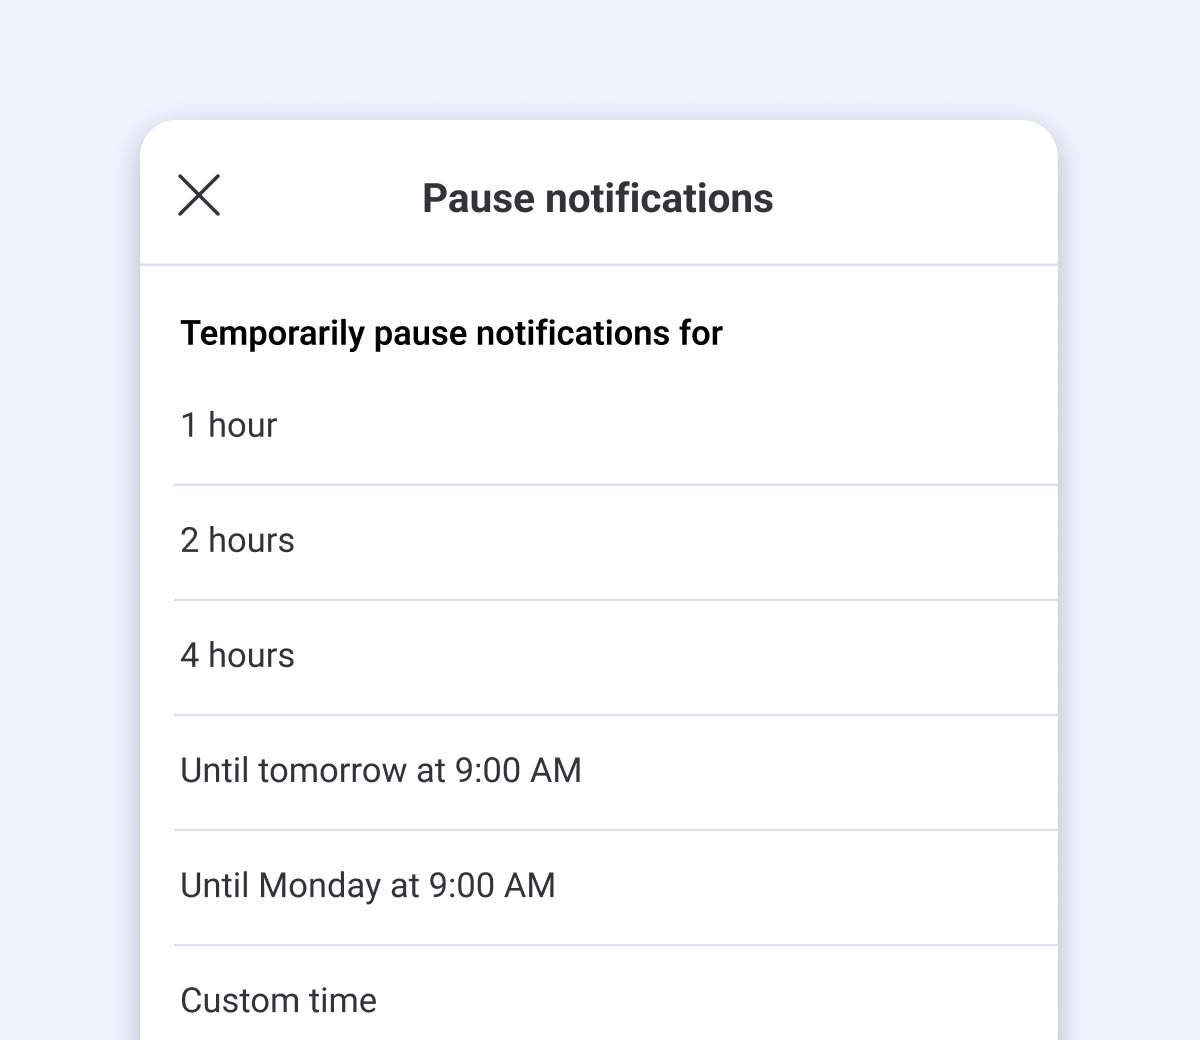 Pause notifications